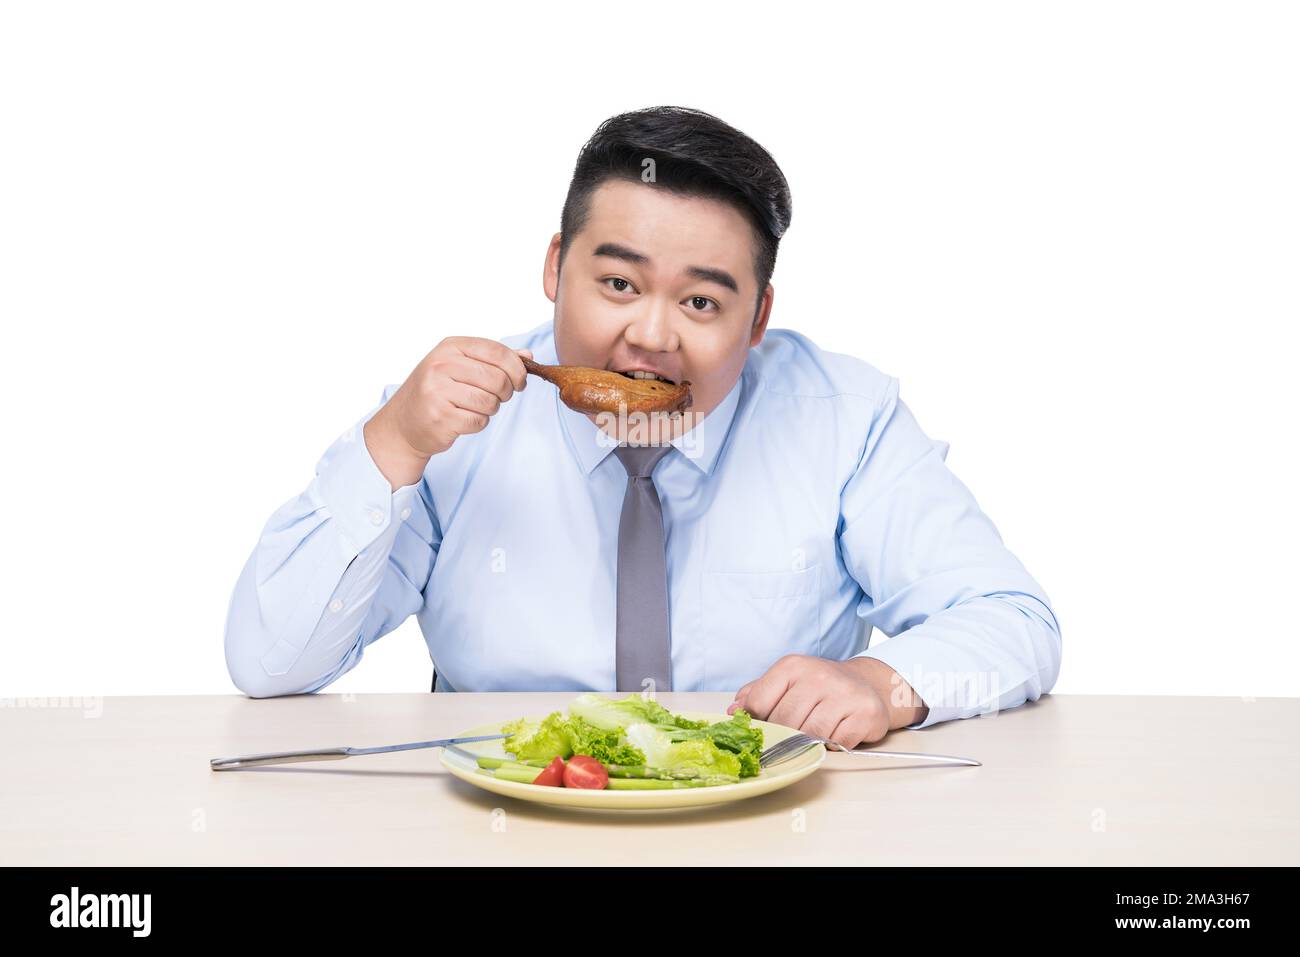 Fat people at dinner Stock Photo